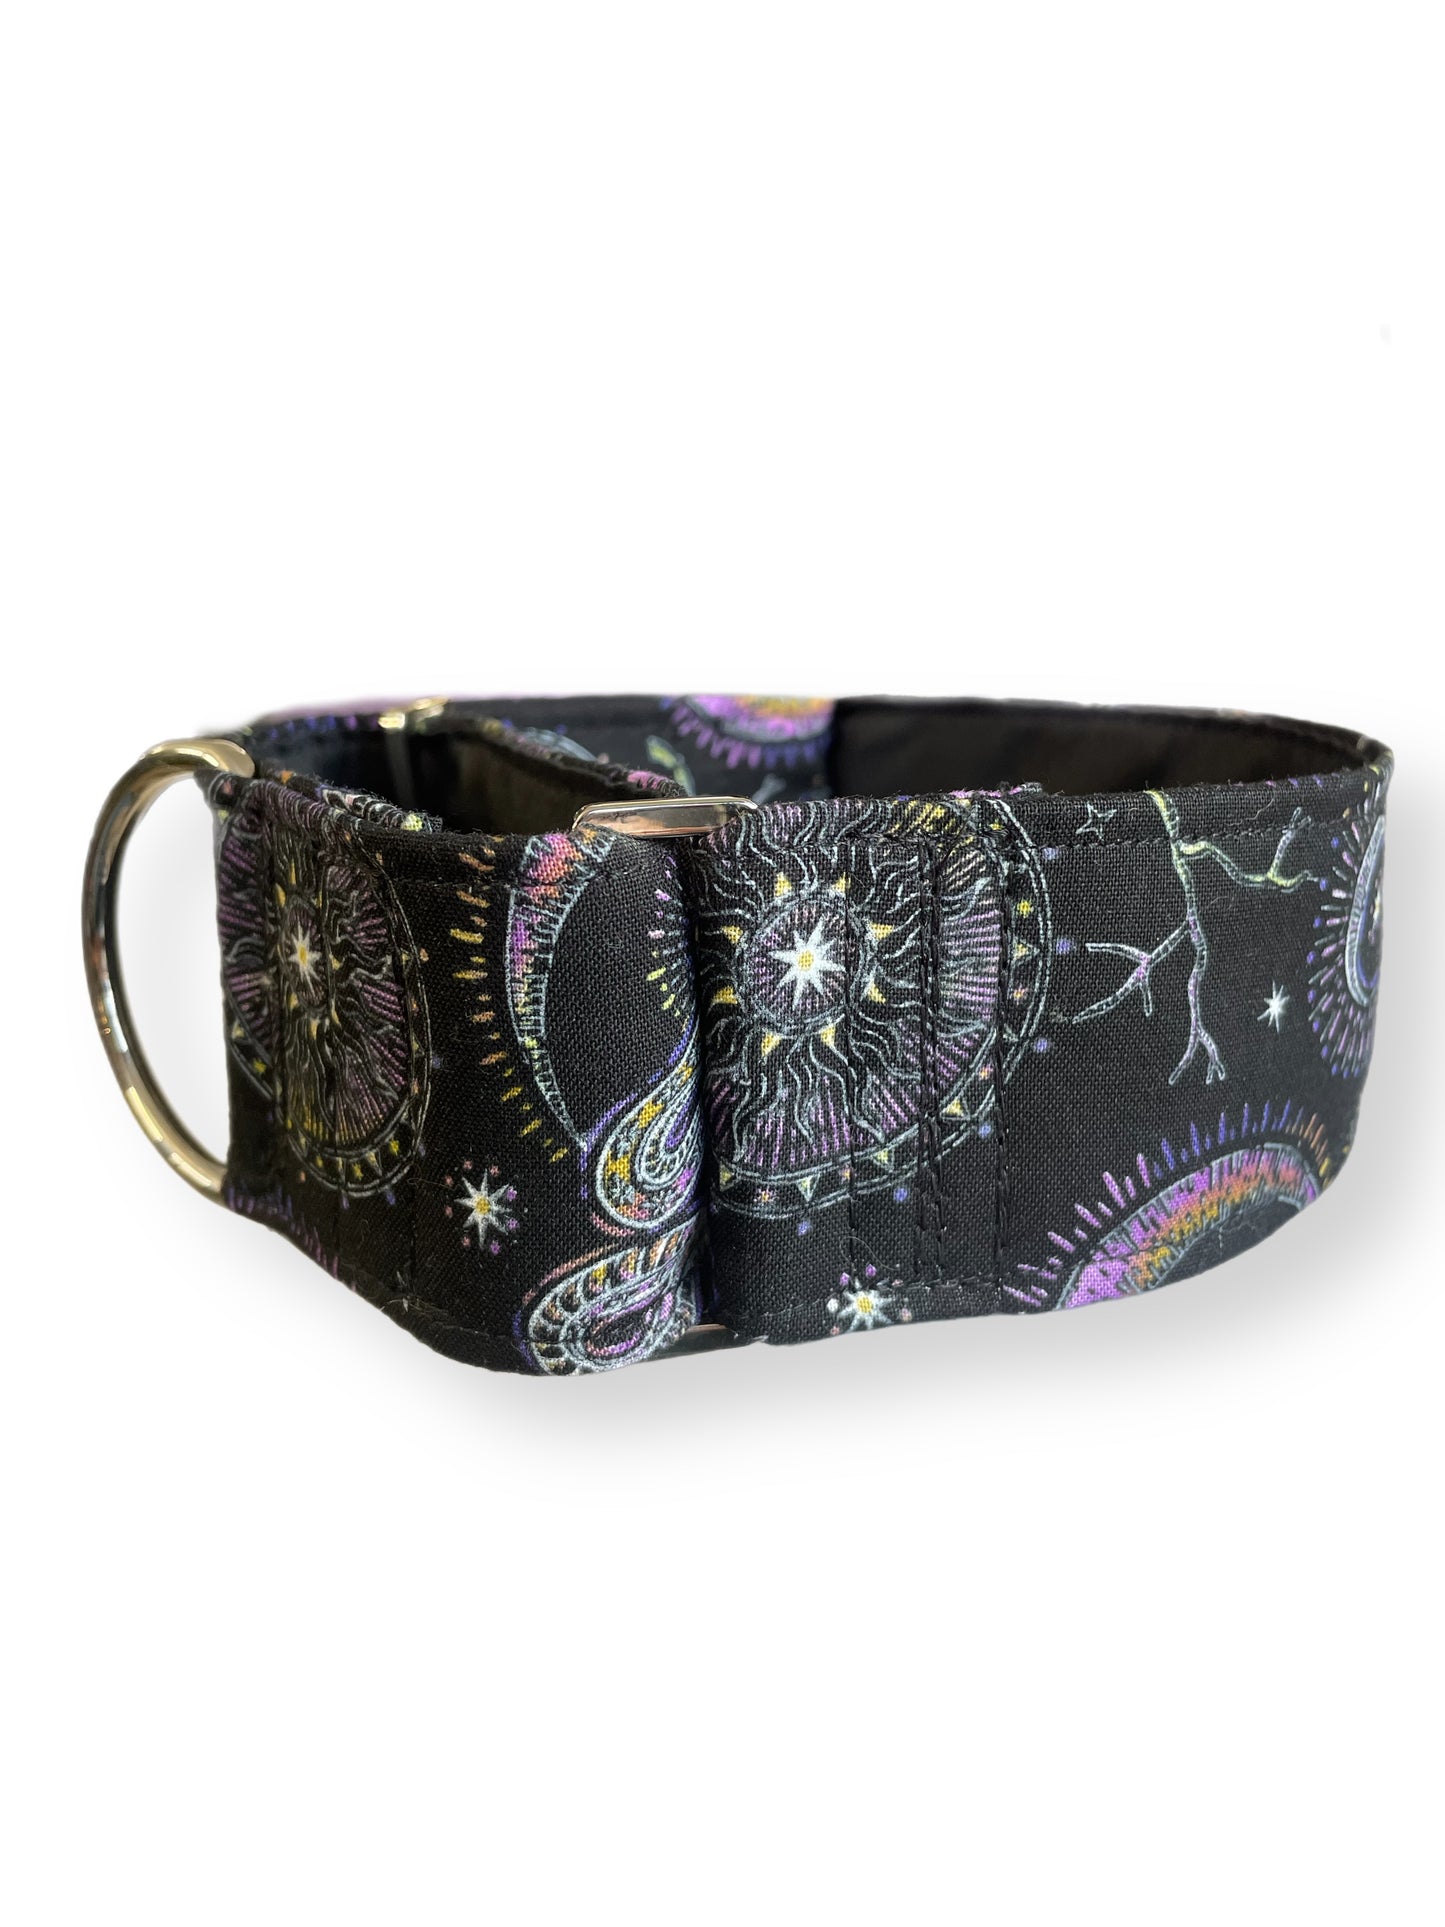 Spellbound enchanting magical sorcery greyhound design  Martingale collar cotton covered 50mm width super soft